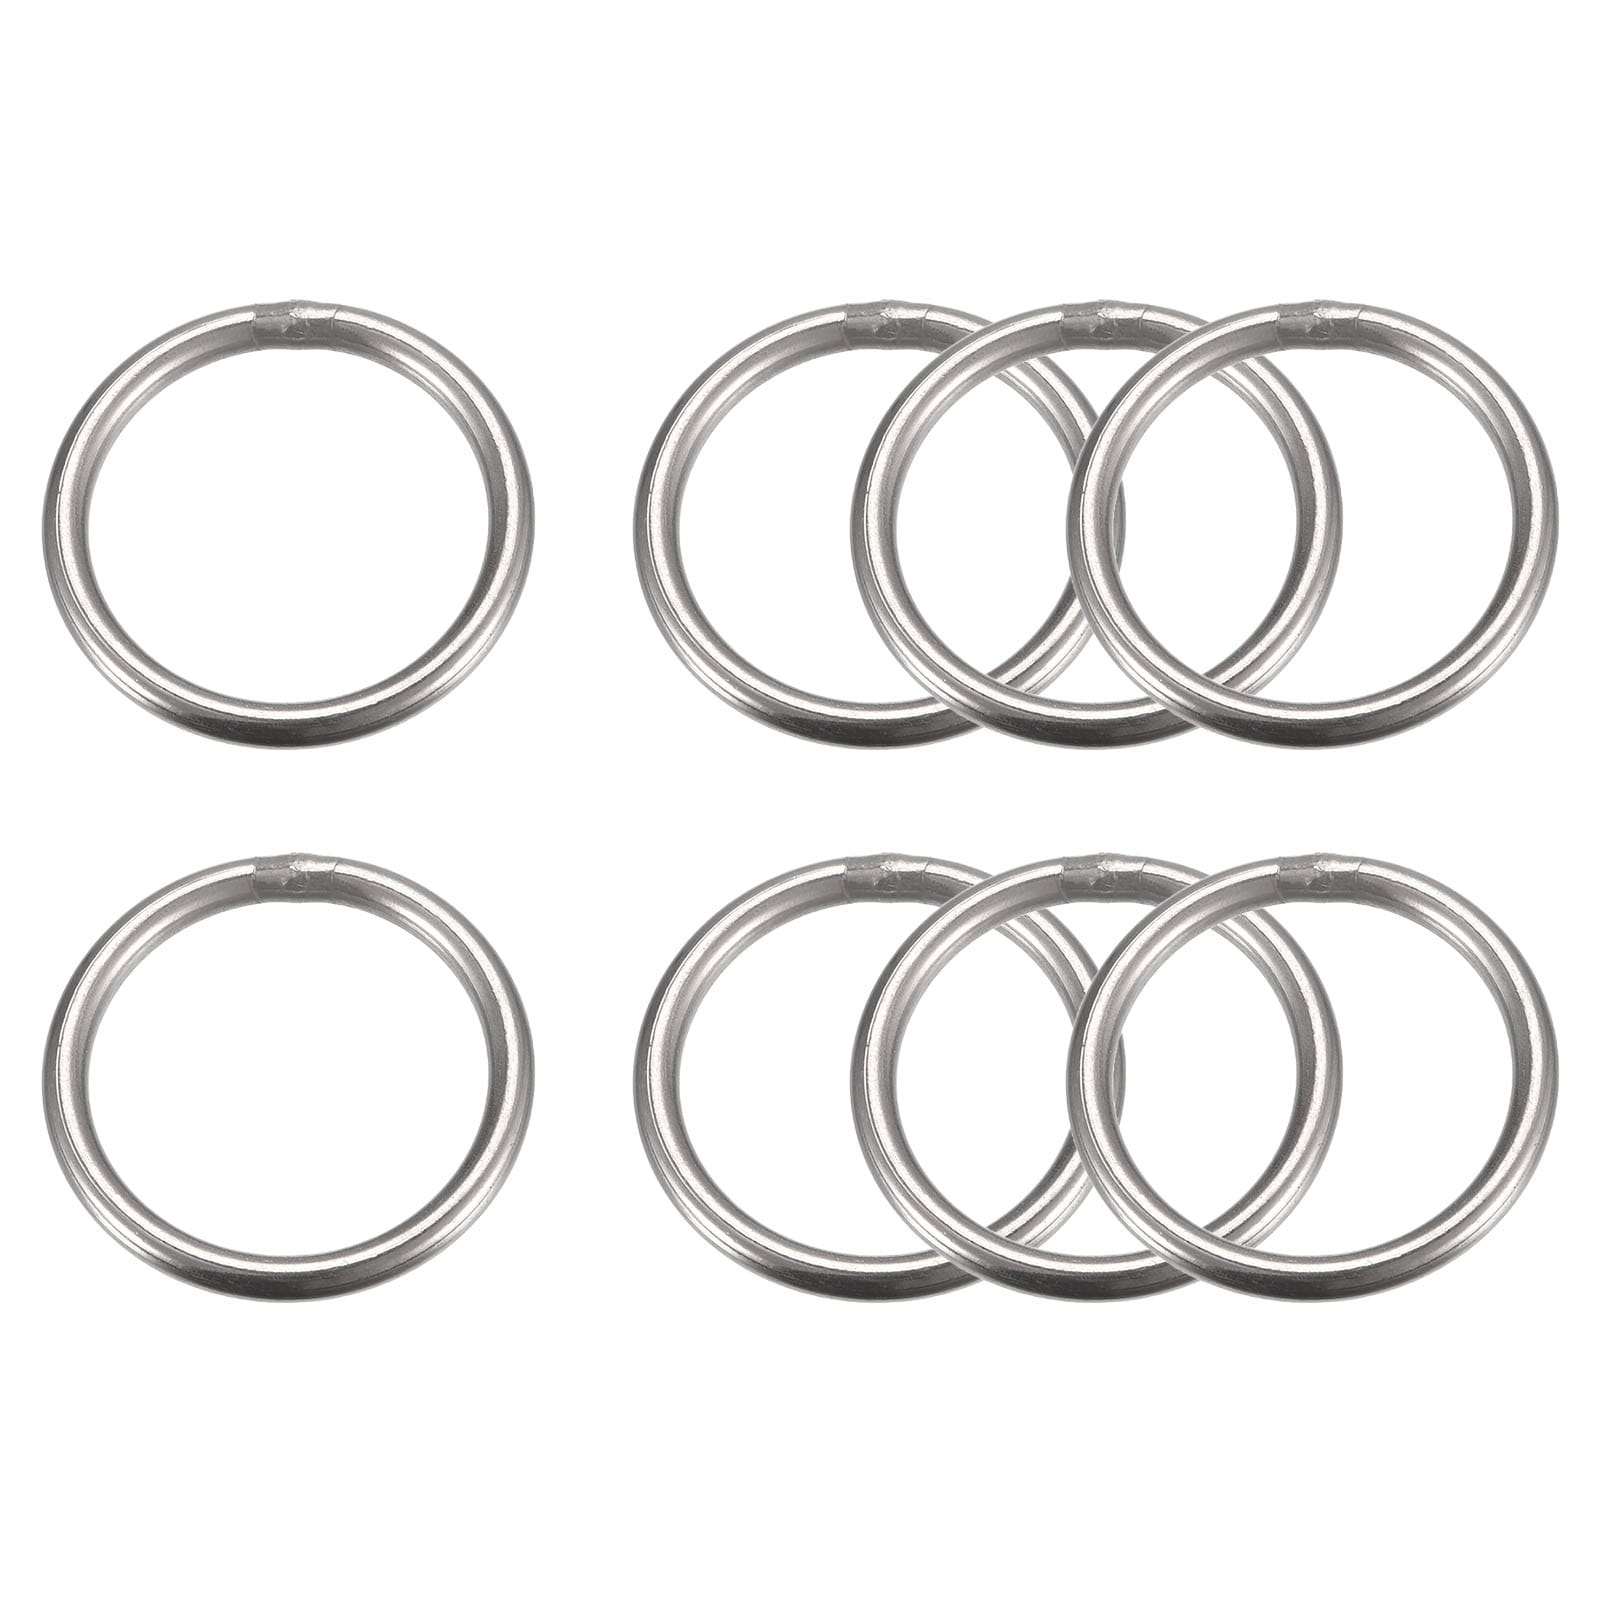 Unique Bargains Stainless Steel O Rings, Multi-Purpose Metal Welded O-Rings Round Ring - Silver Tone - 90x5mm, 5pcs